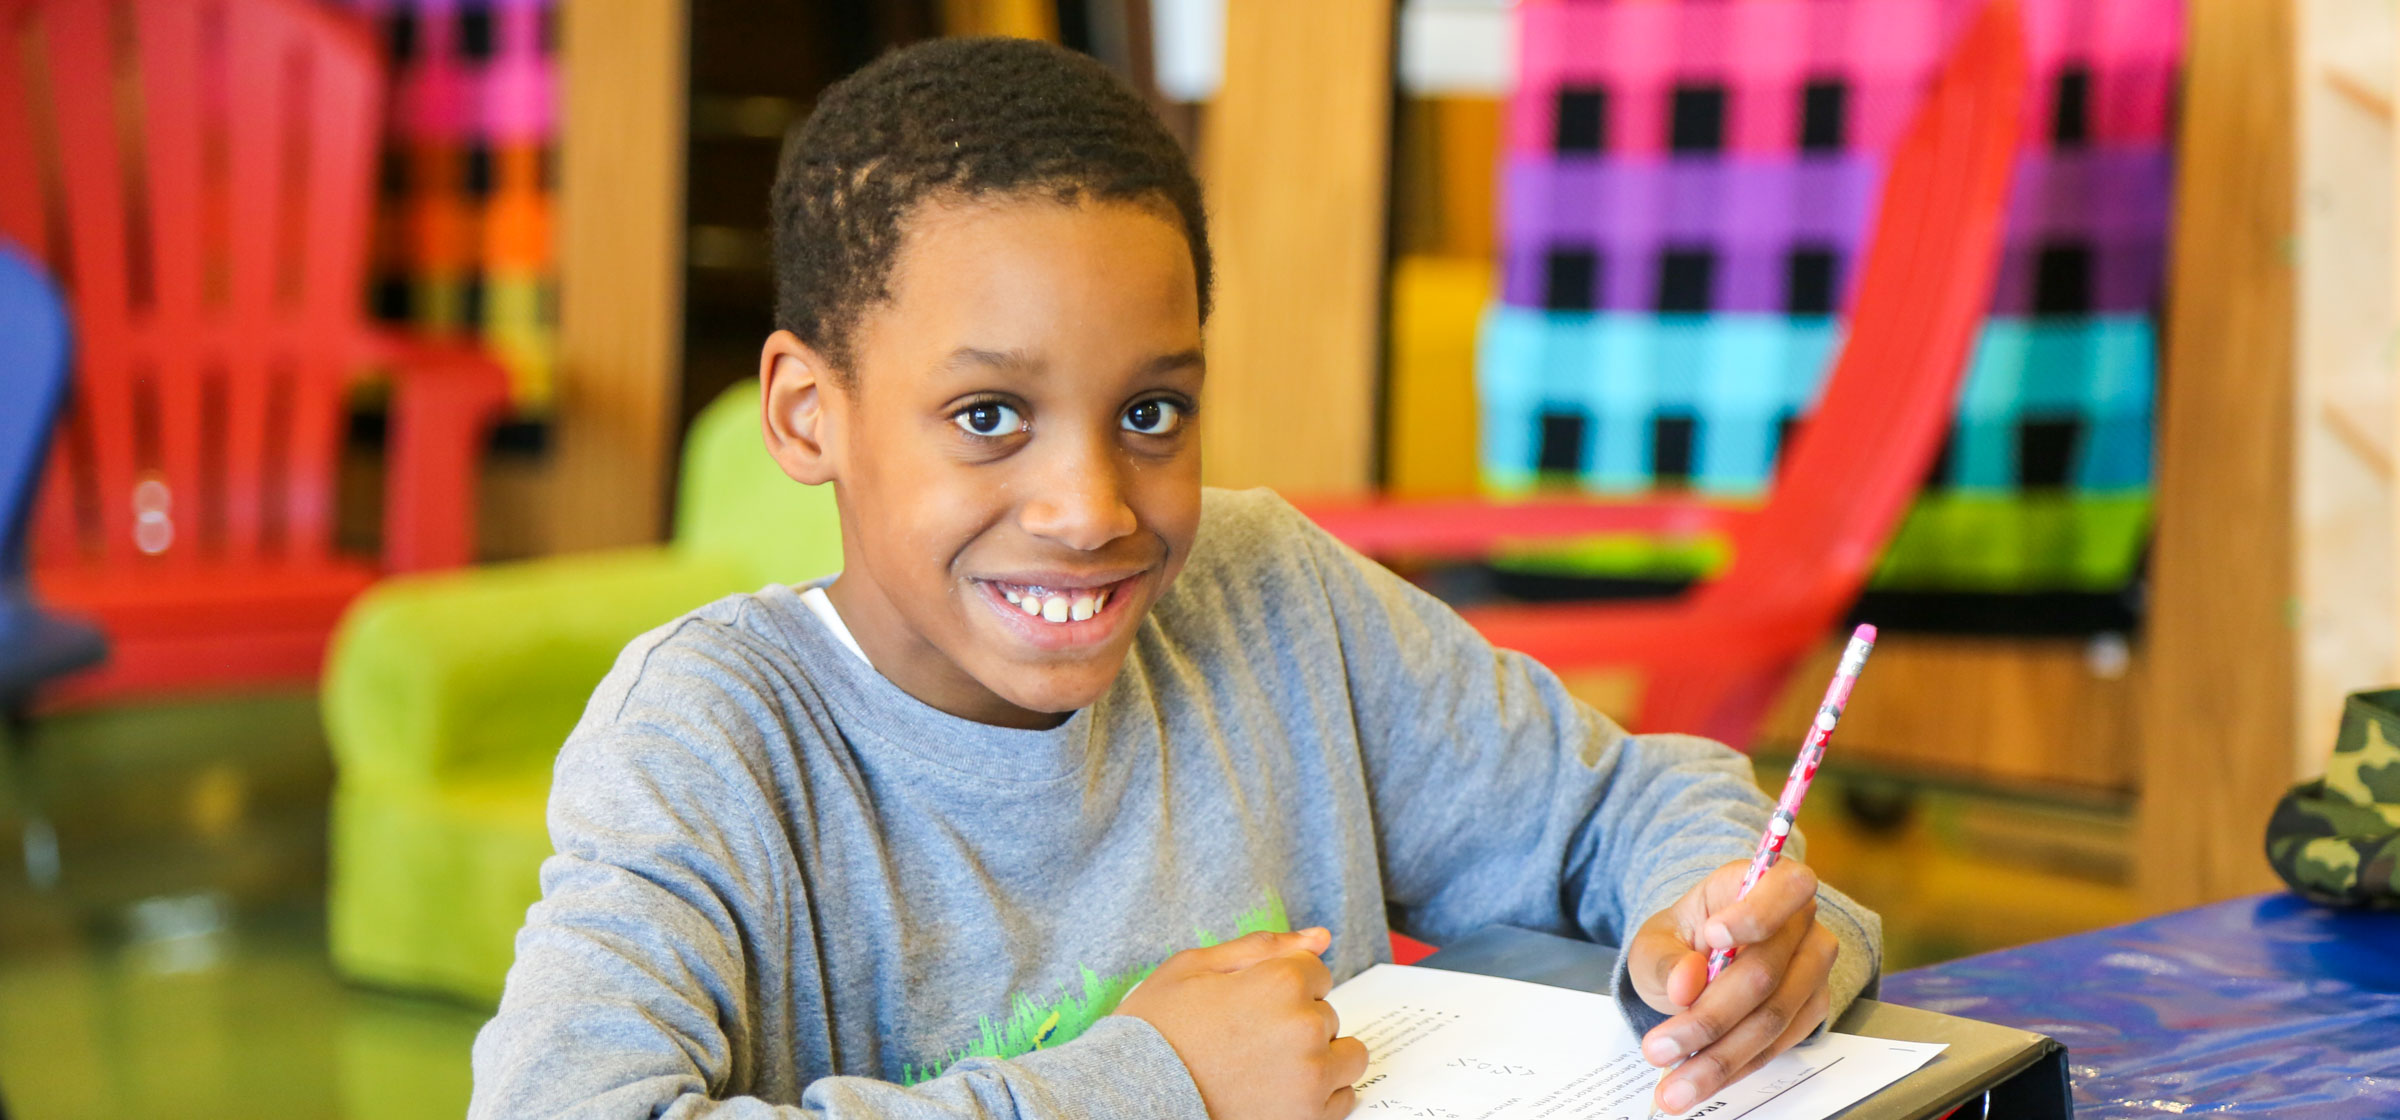 Child working on homework sitting at a table smiling